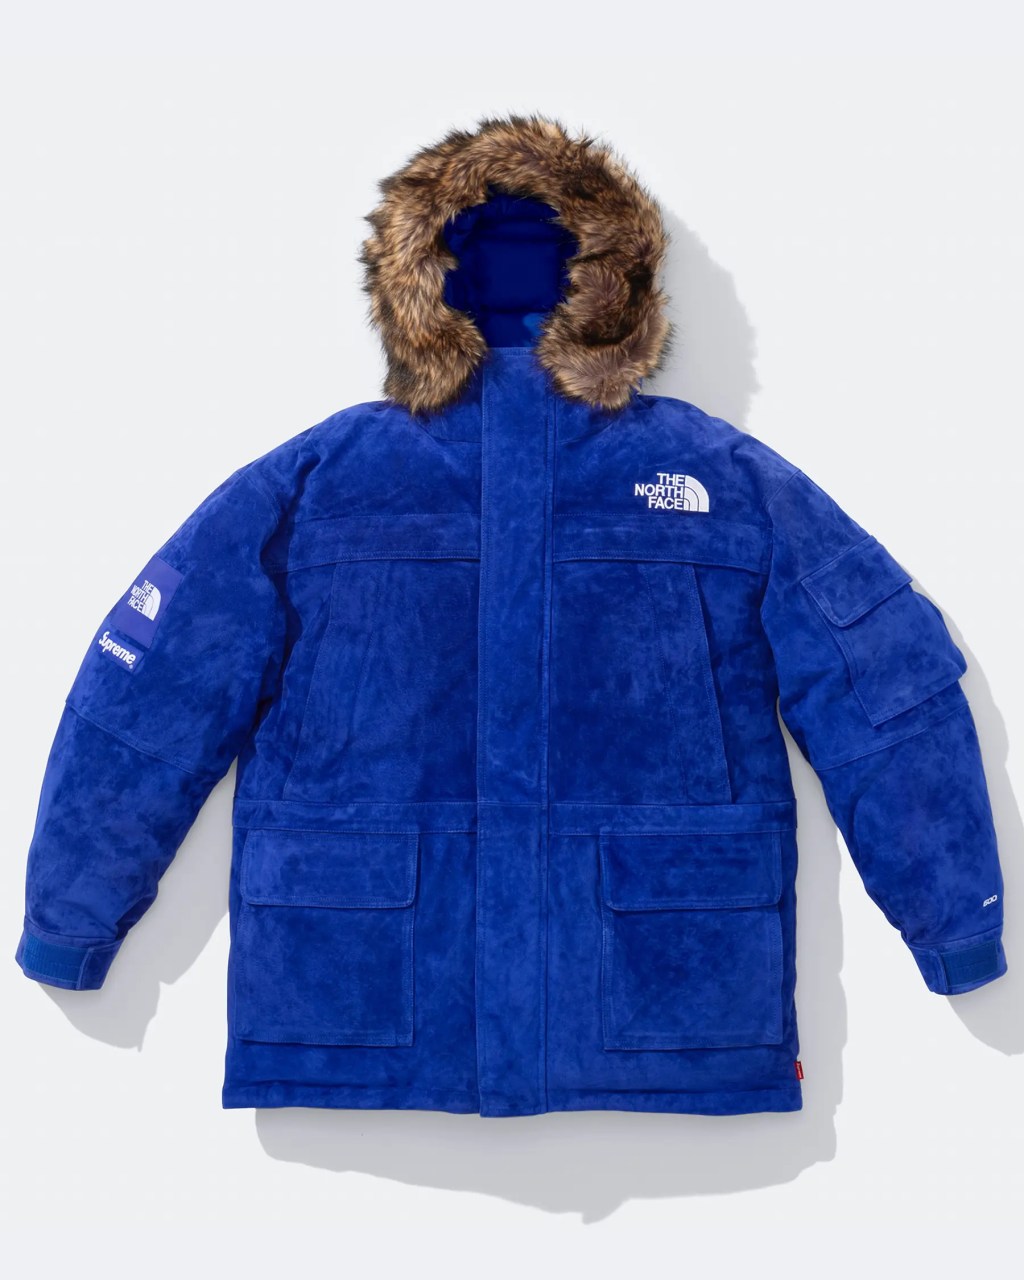 Supreme X The North Face Parka Collab Is A Luxe Outerwear Upgrade - Maxim